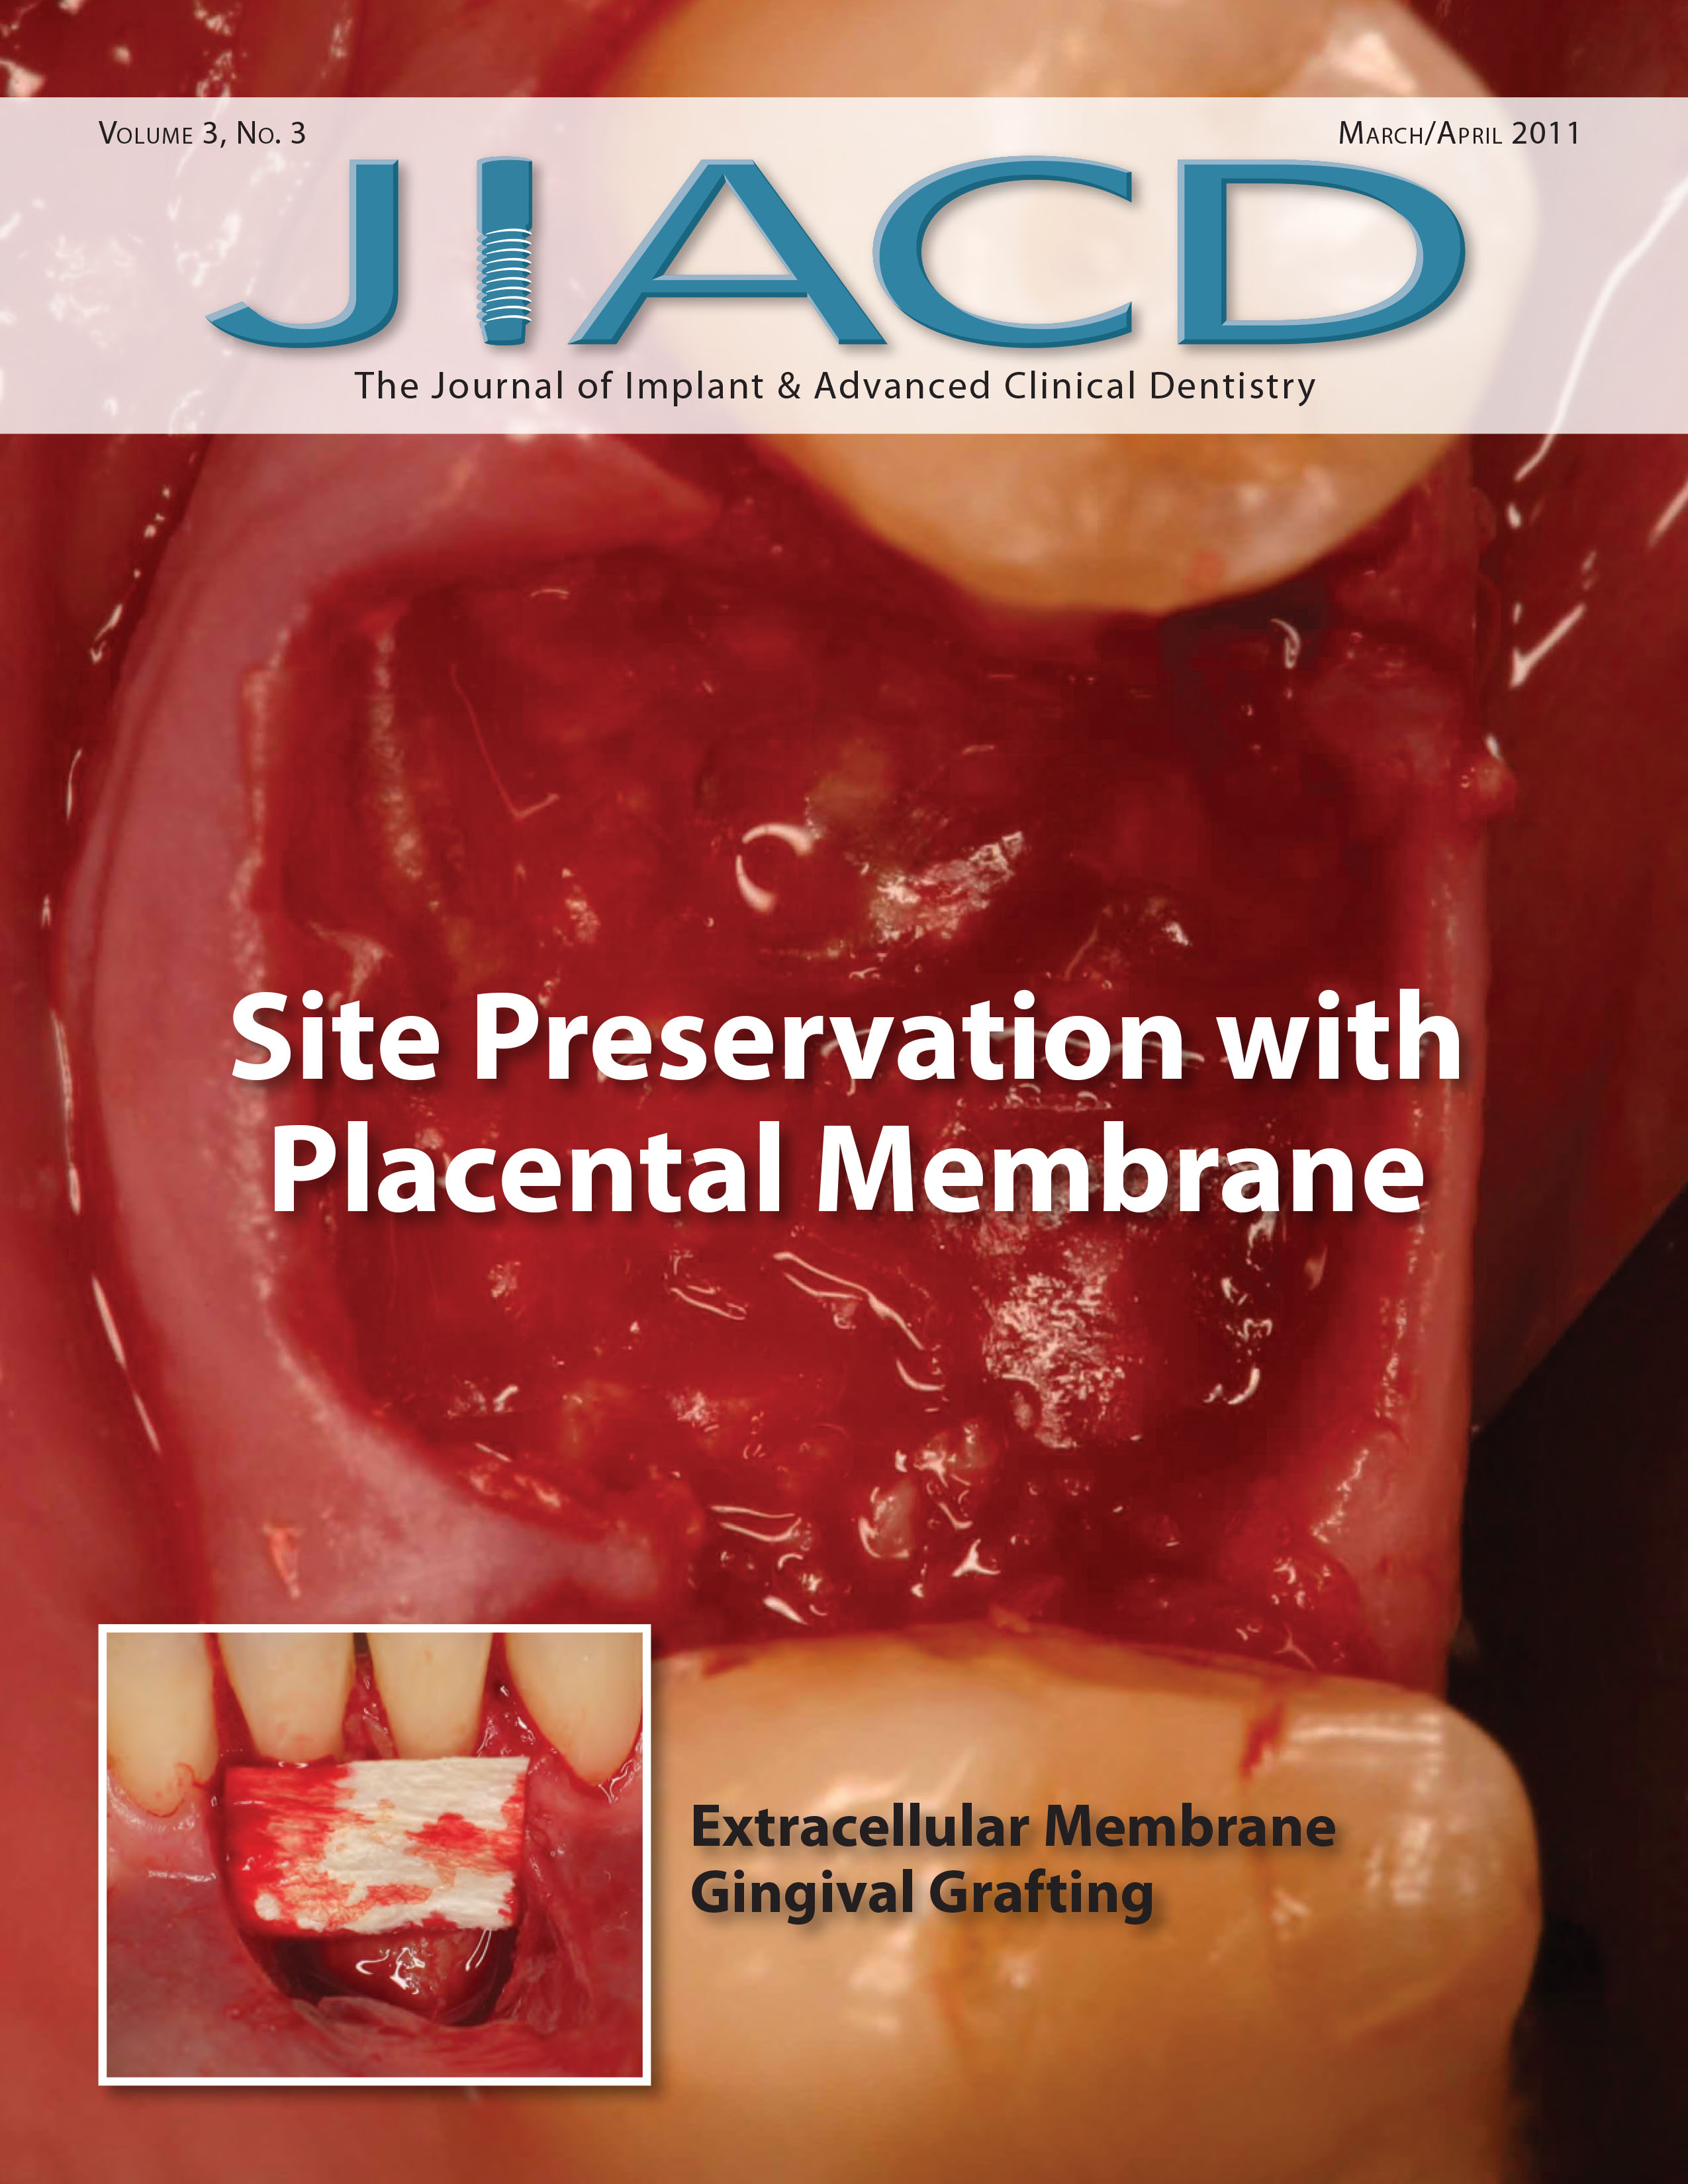 Site Preservation with Placental Membrane